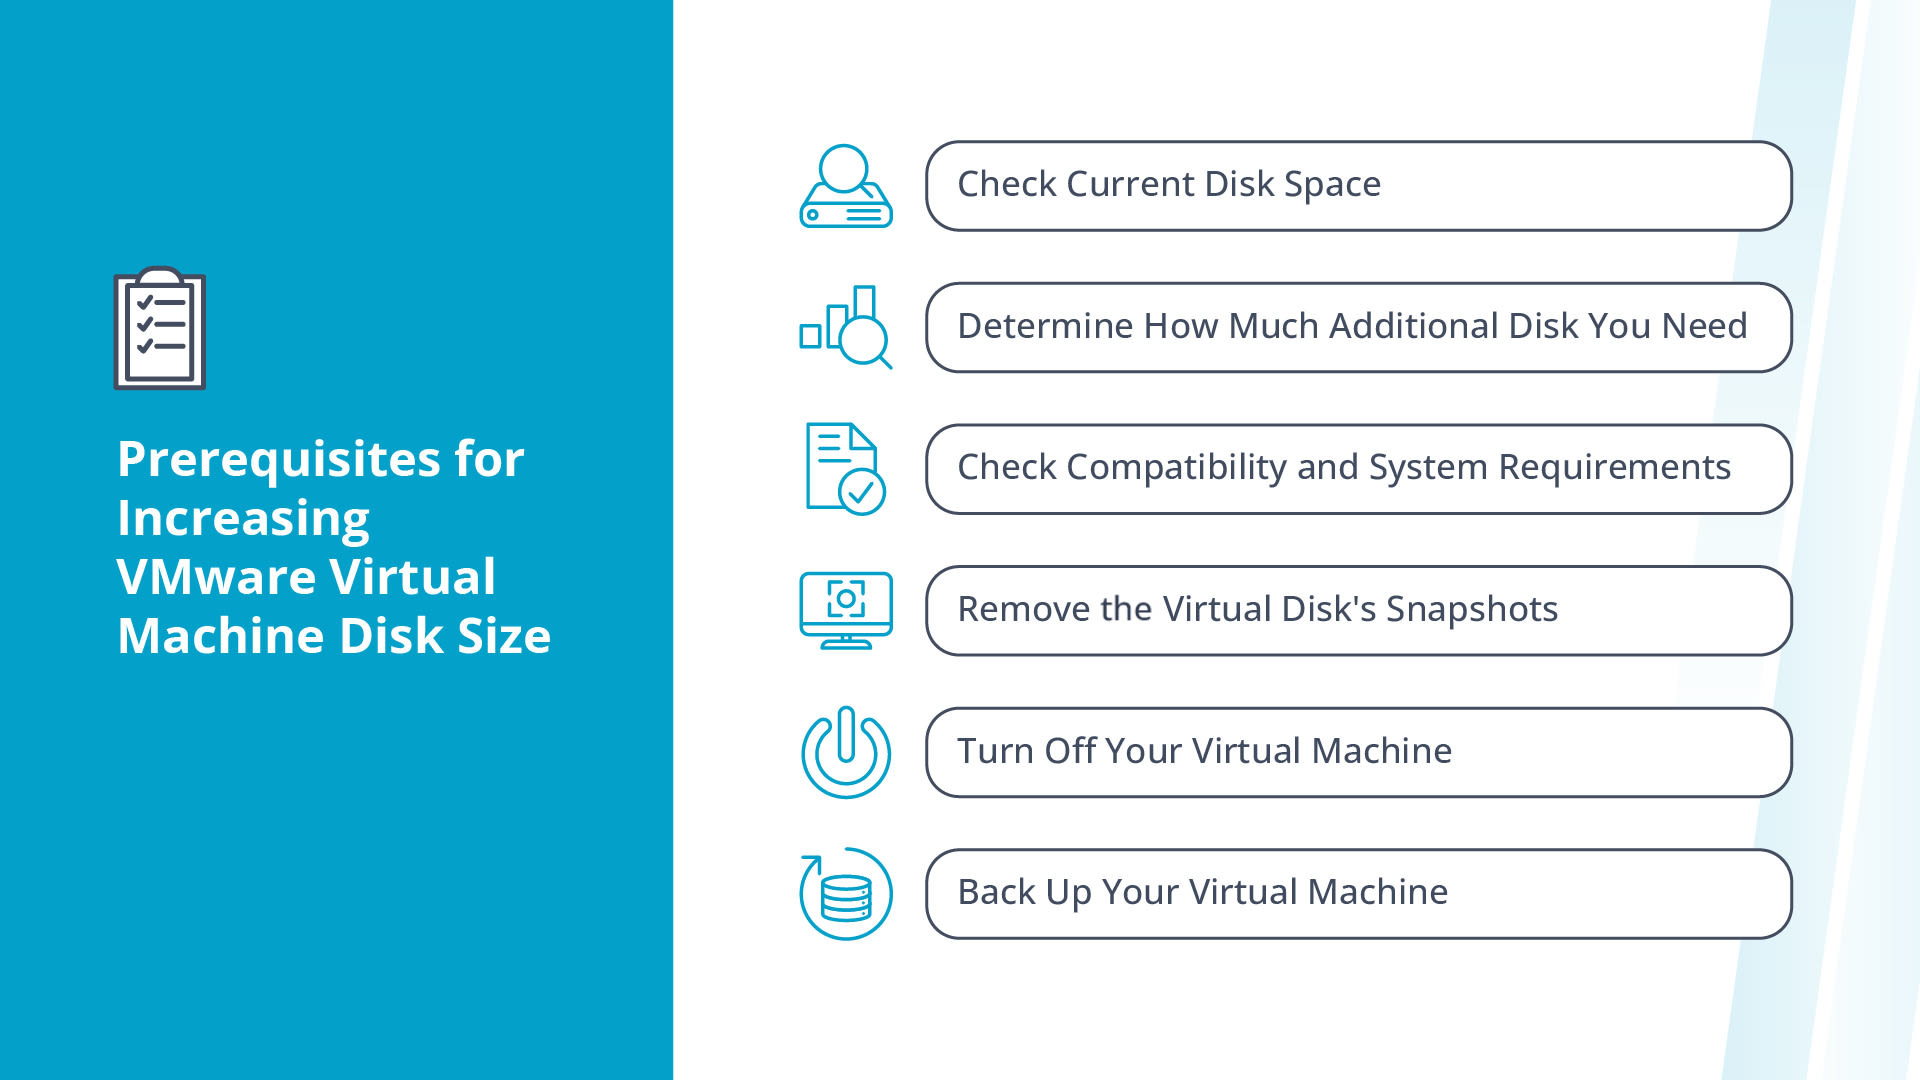 The prerequisites you need to meet before increasing the size of your VMware disk.